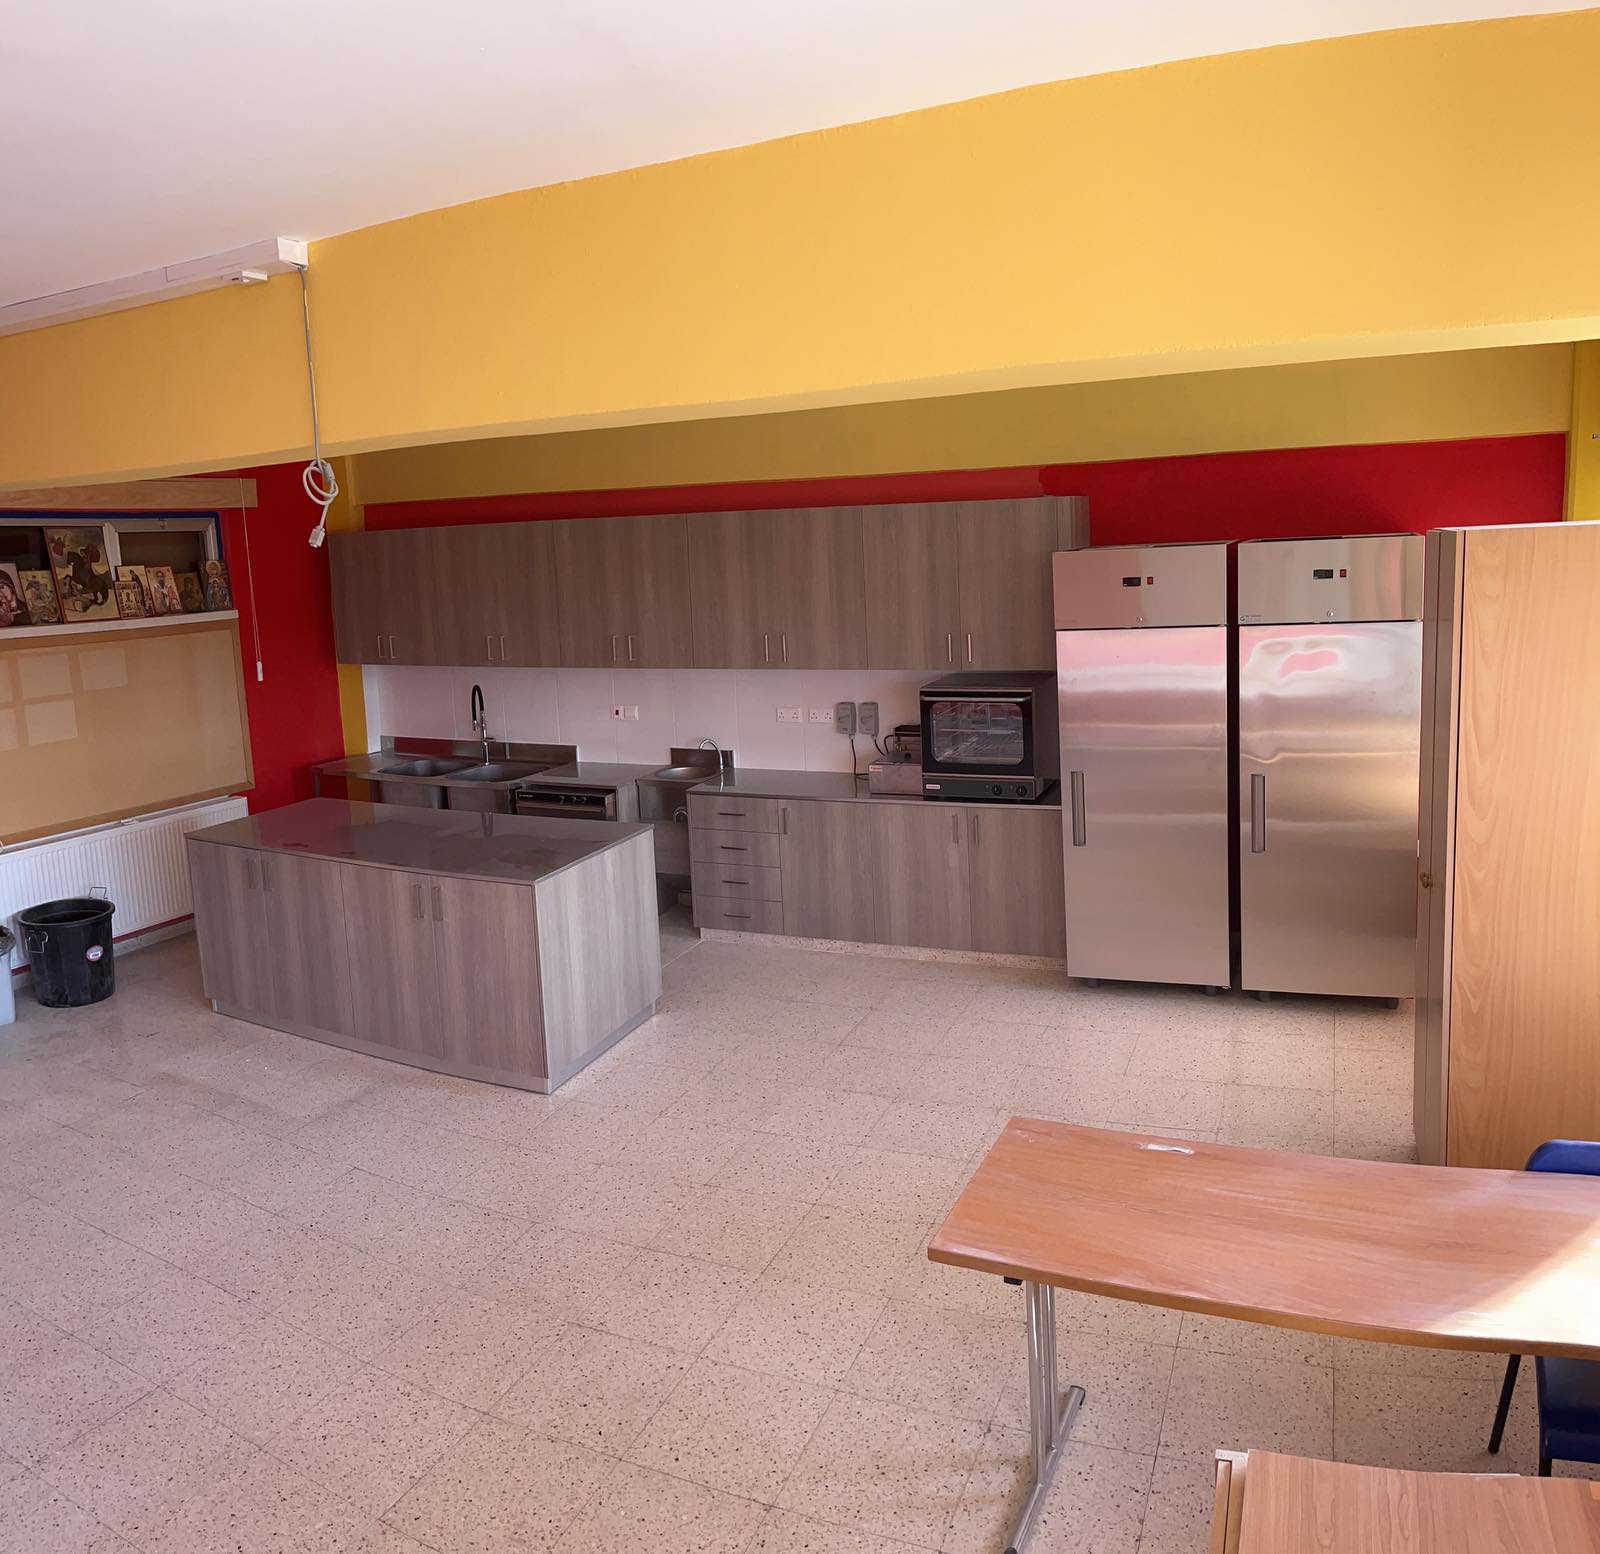 Completed! Renovation of Kitchen At Iamatiki Primary School – Limassol – Cyprus